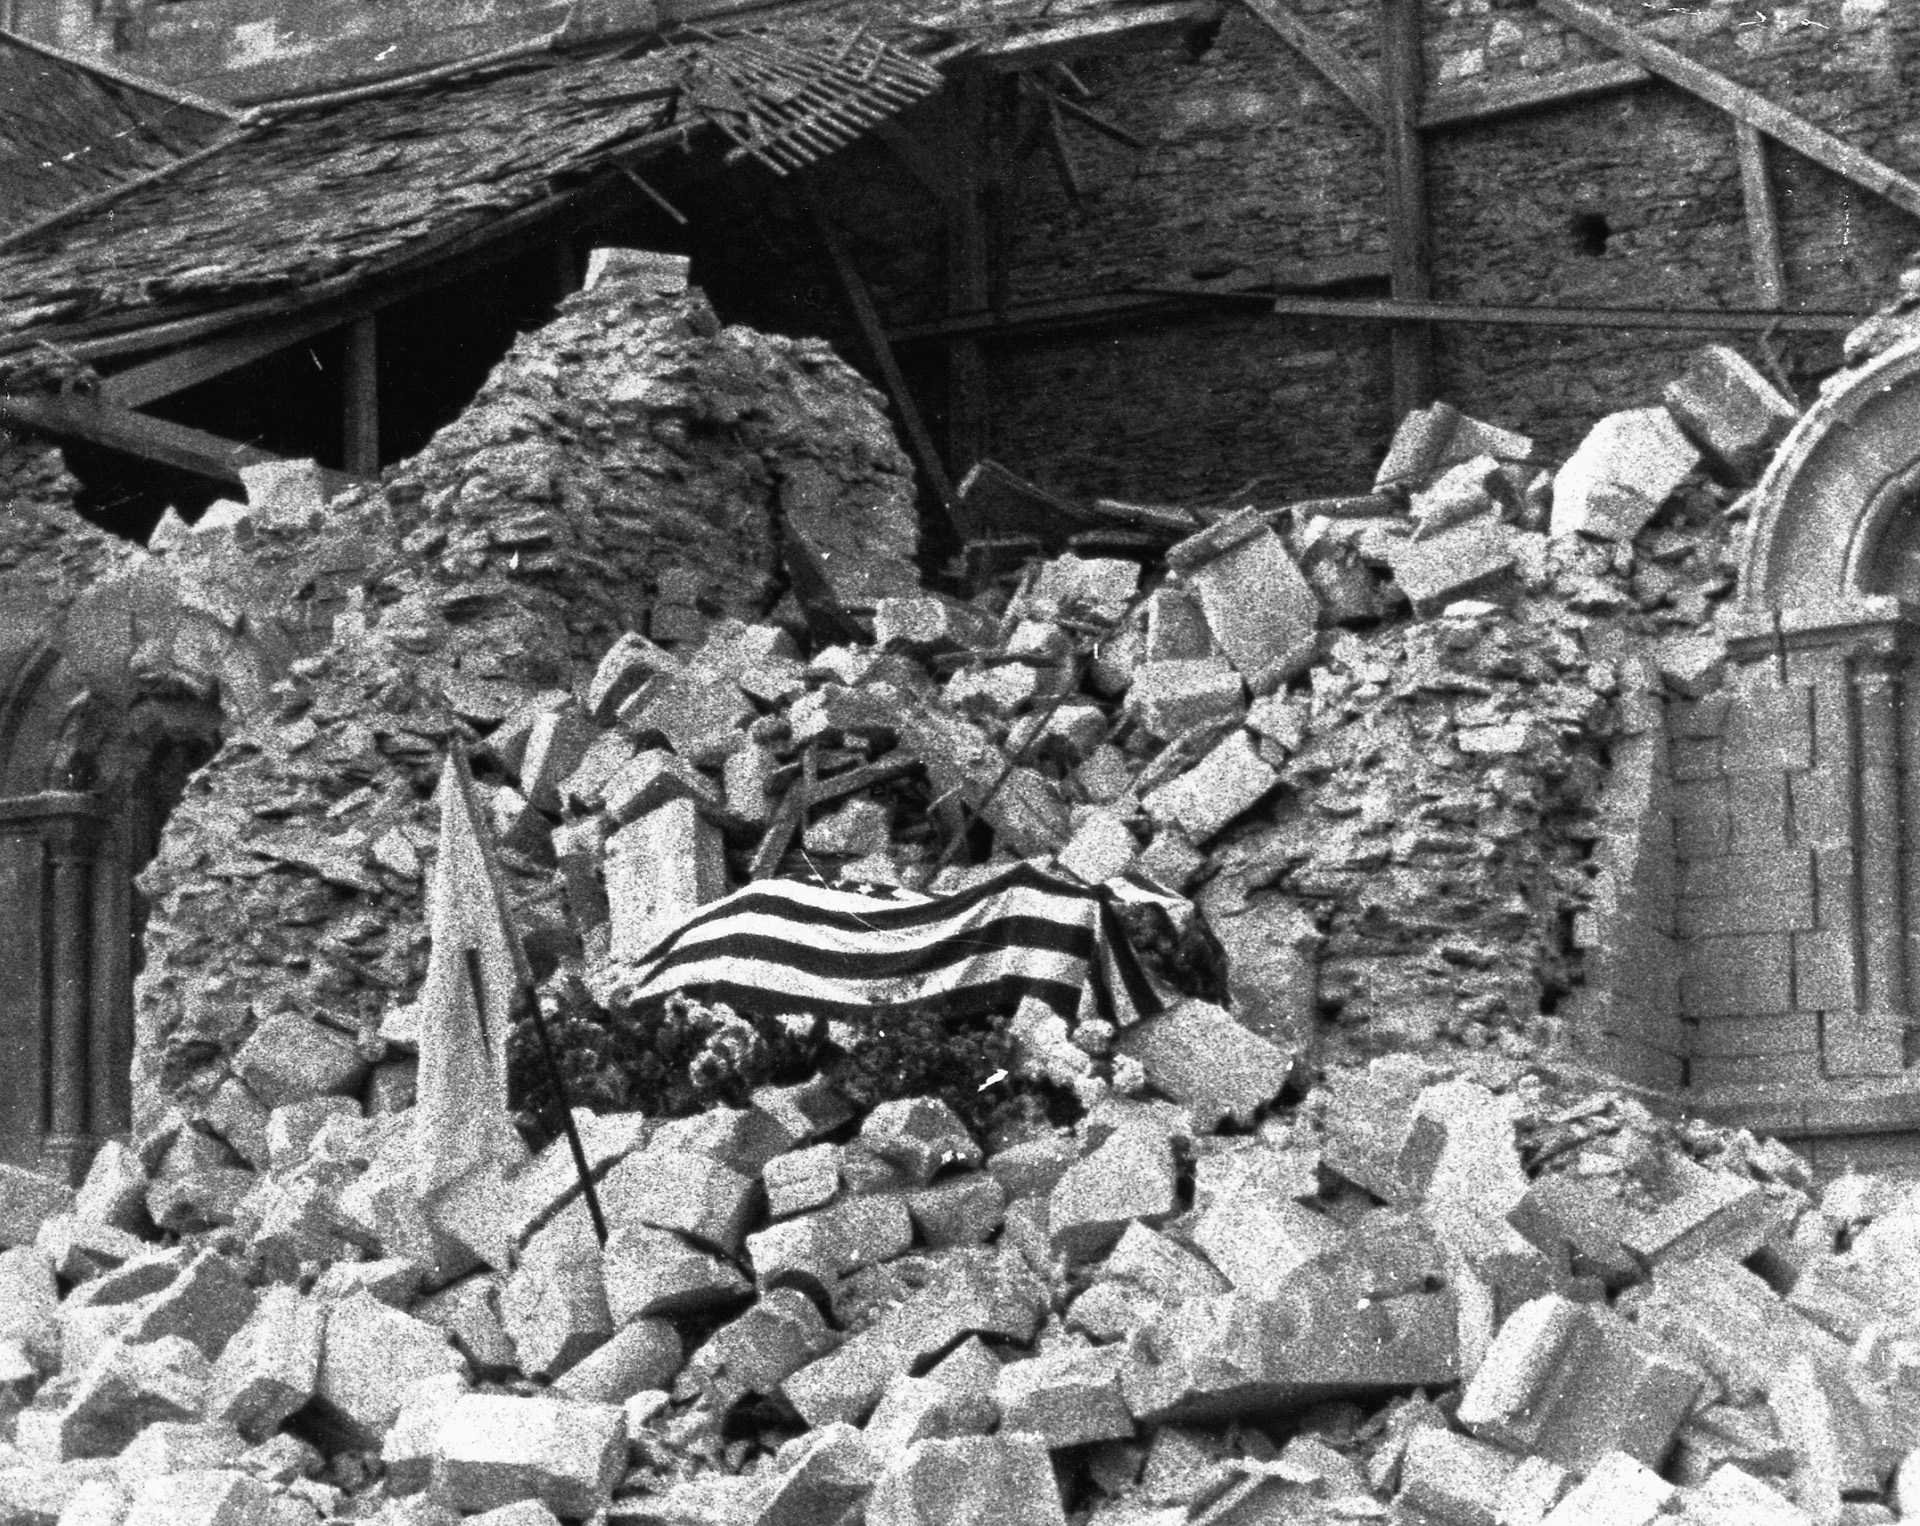 His body draped in an American flag, Major Thomas D. Howie lies in state atop the rubble of a blasted church in the heart of St. Lô.